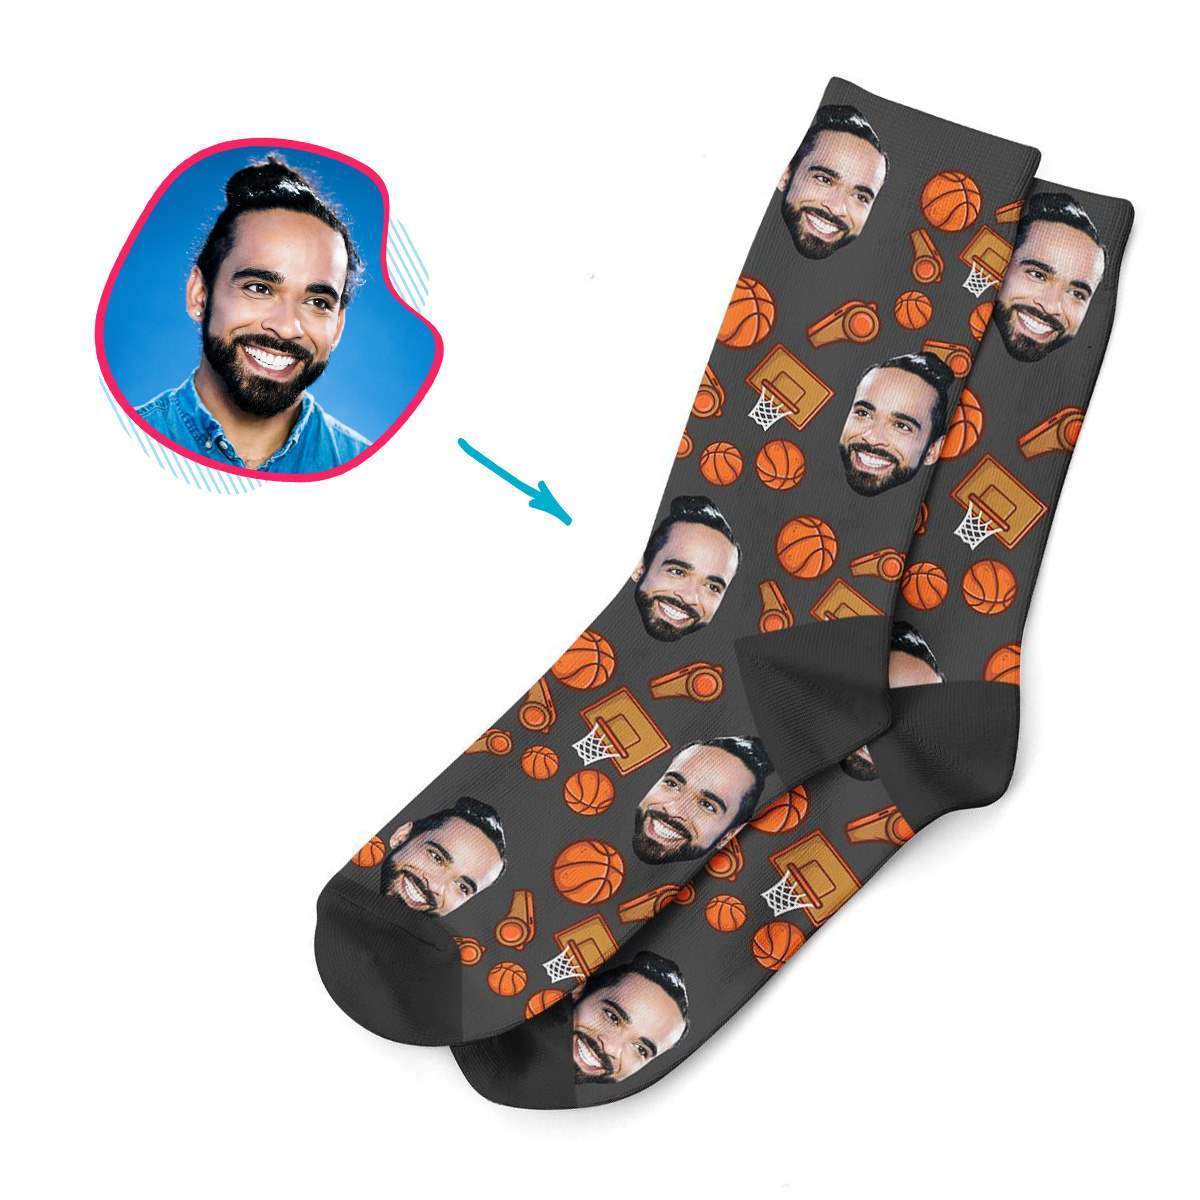 dark Basketball socks personalized with photo of face printed on them